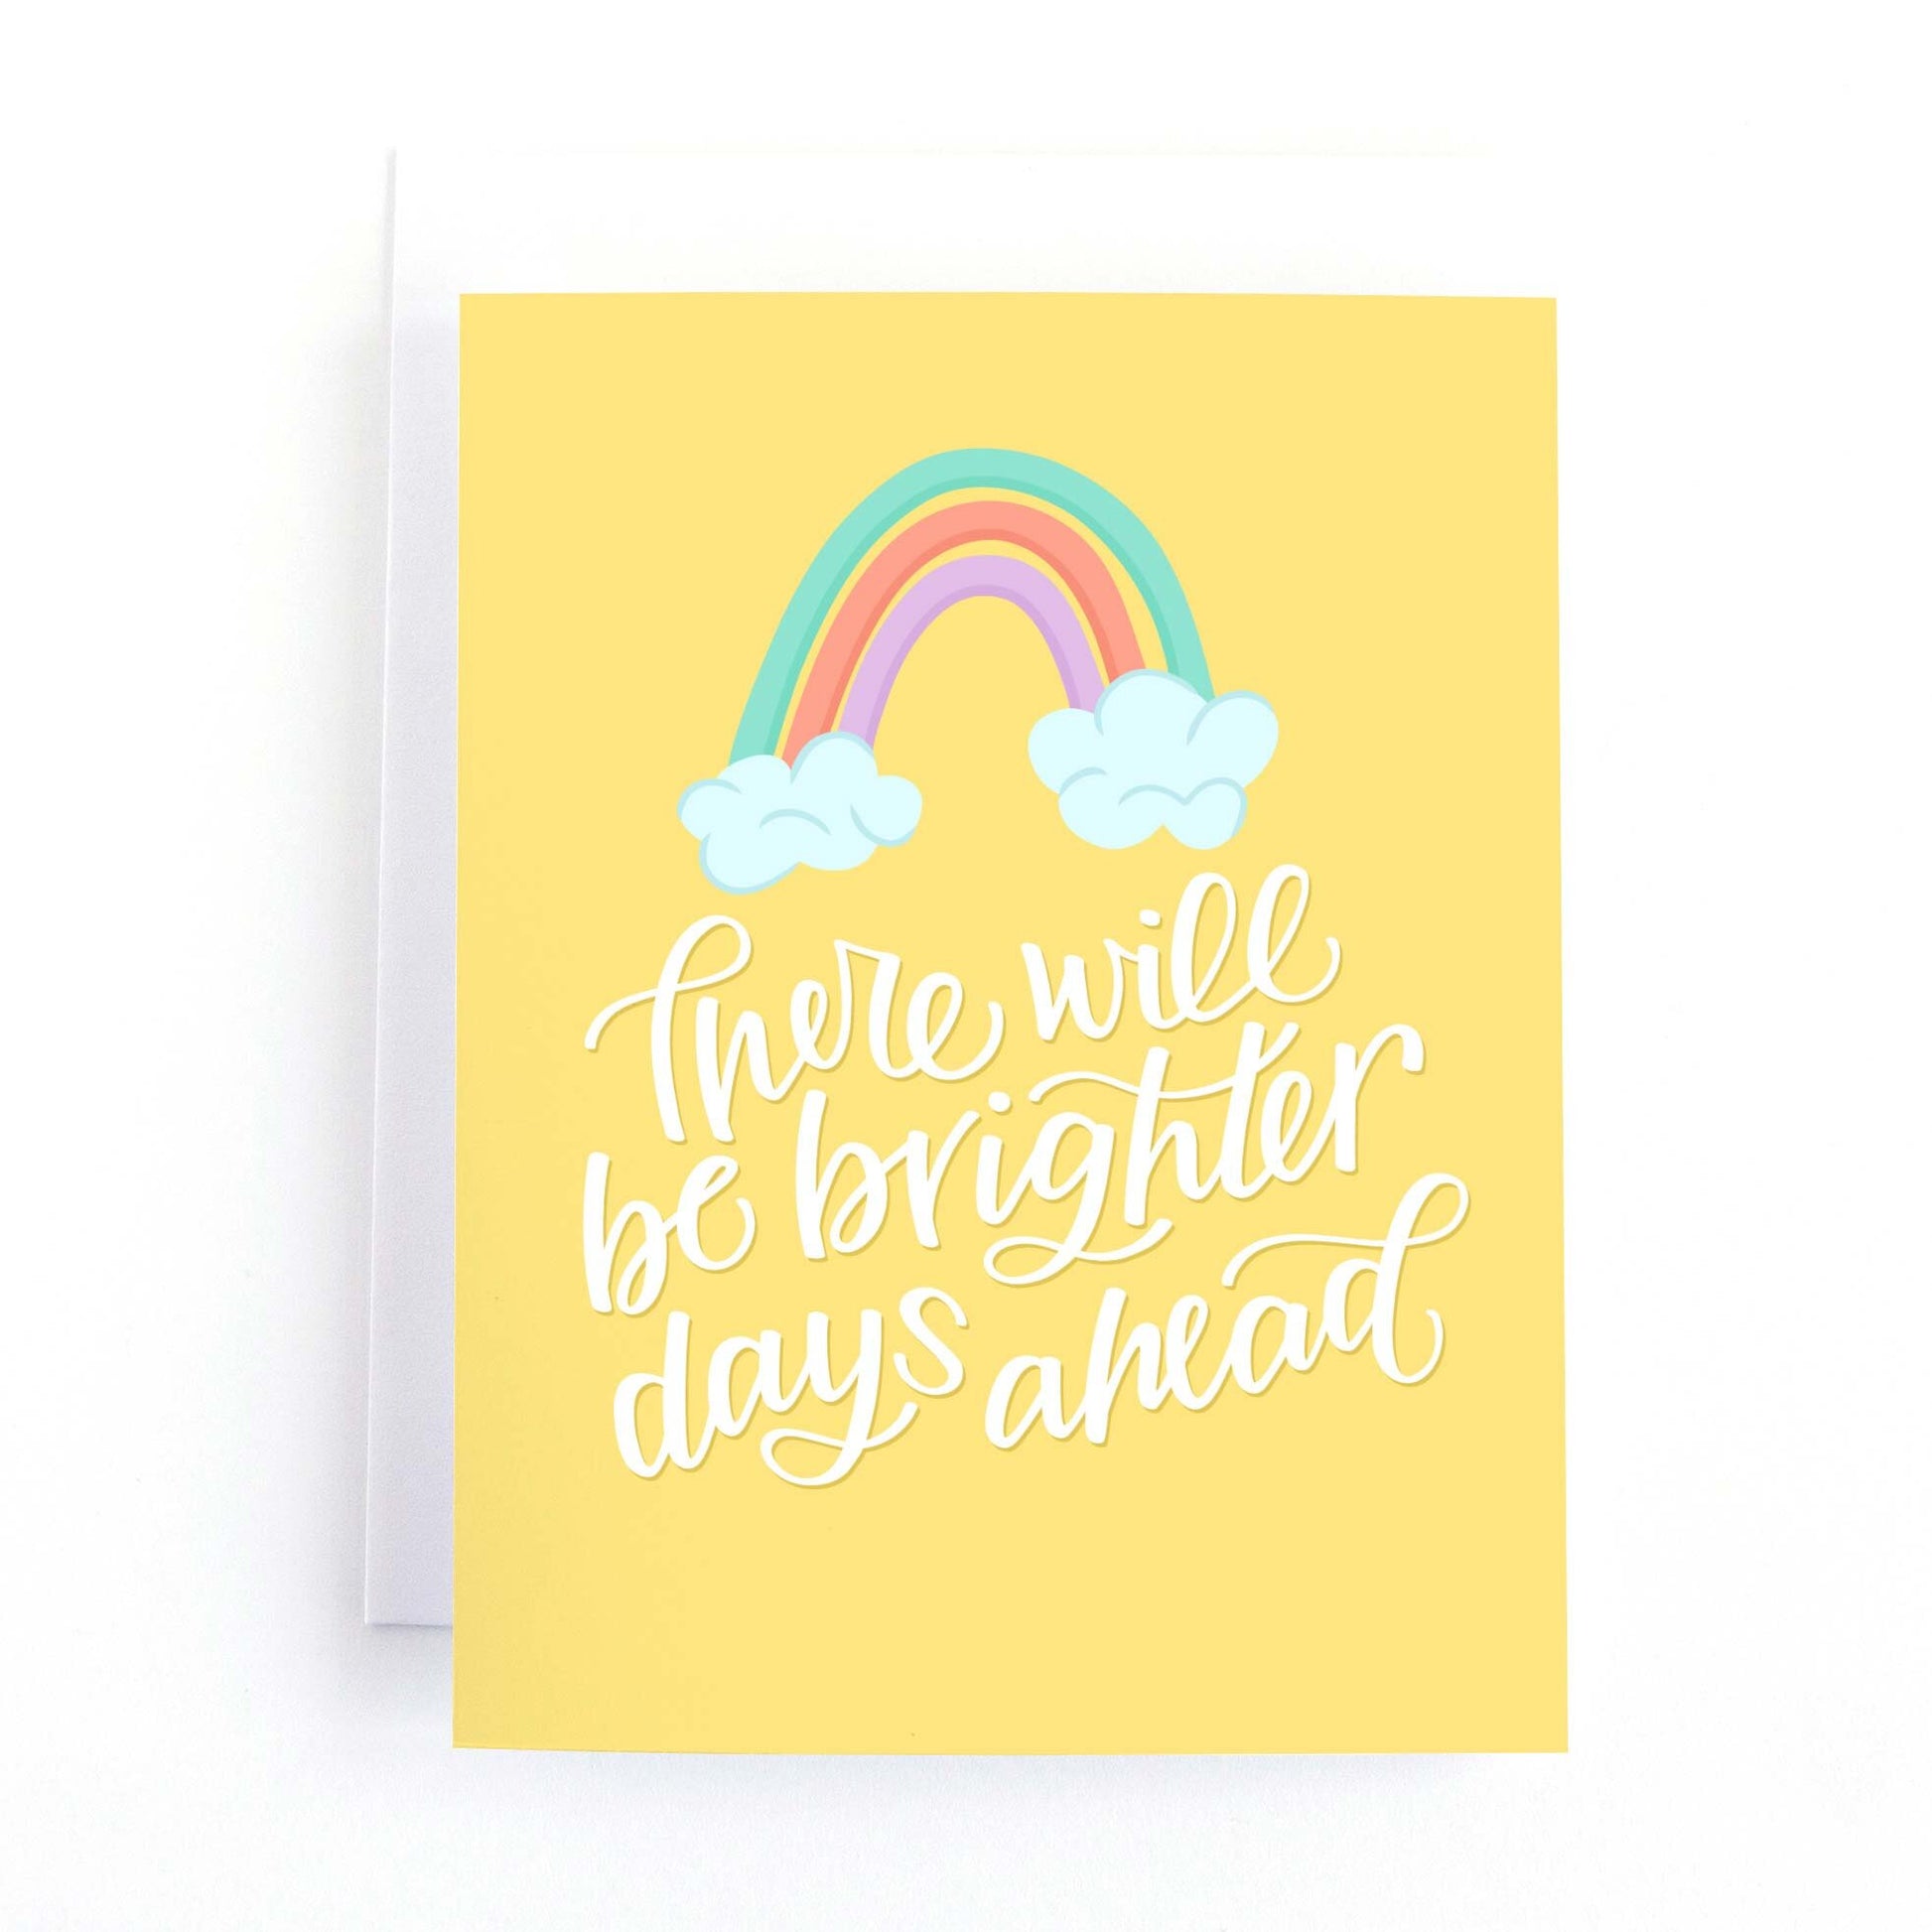 Sympathy and Mental Health Support Card with a rainbow on a yellow background and the text, there will be brighter days ahead.